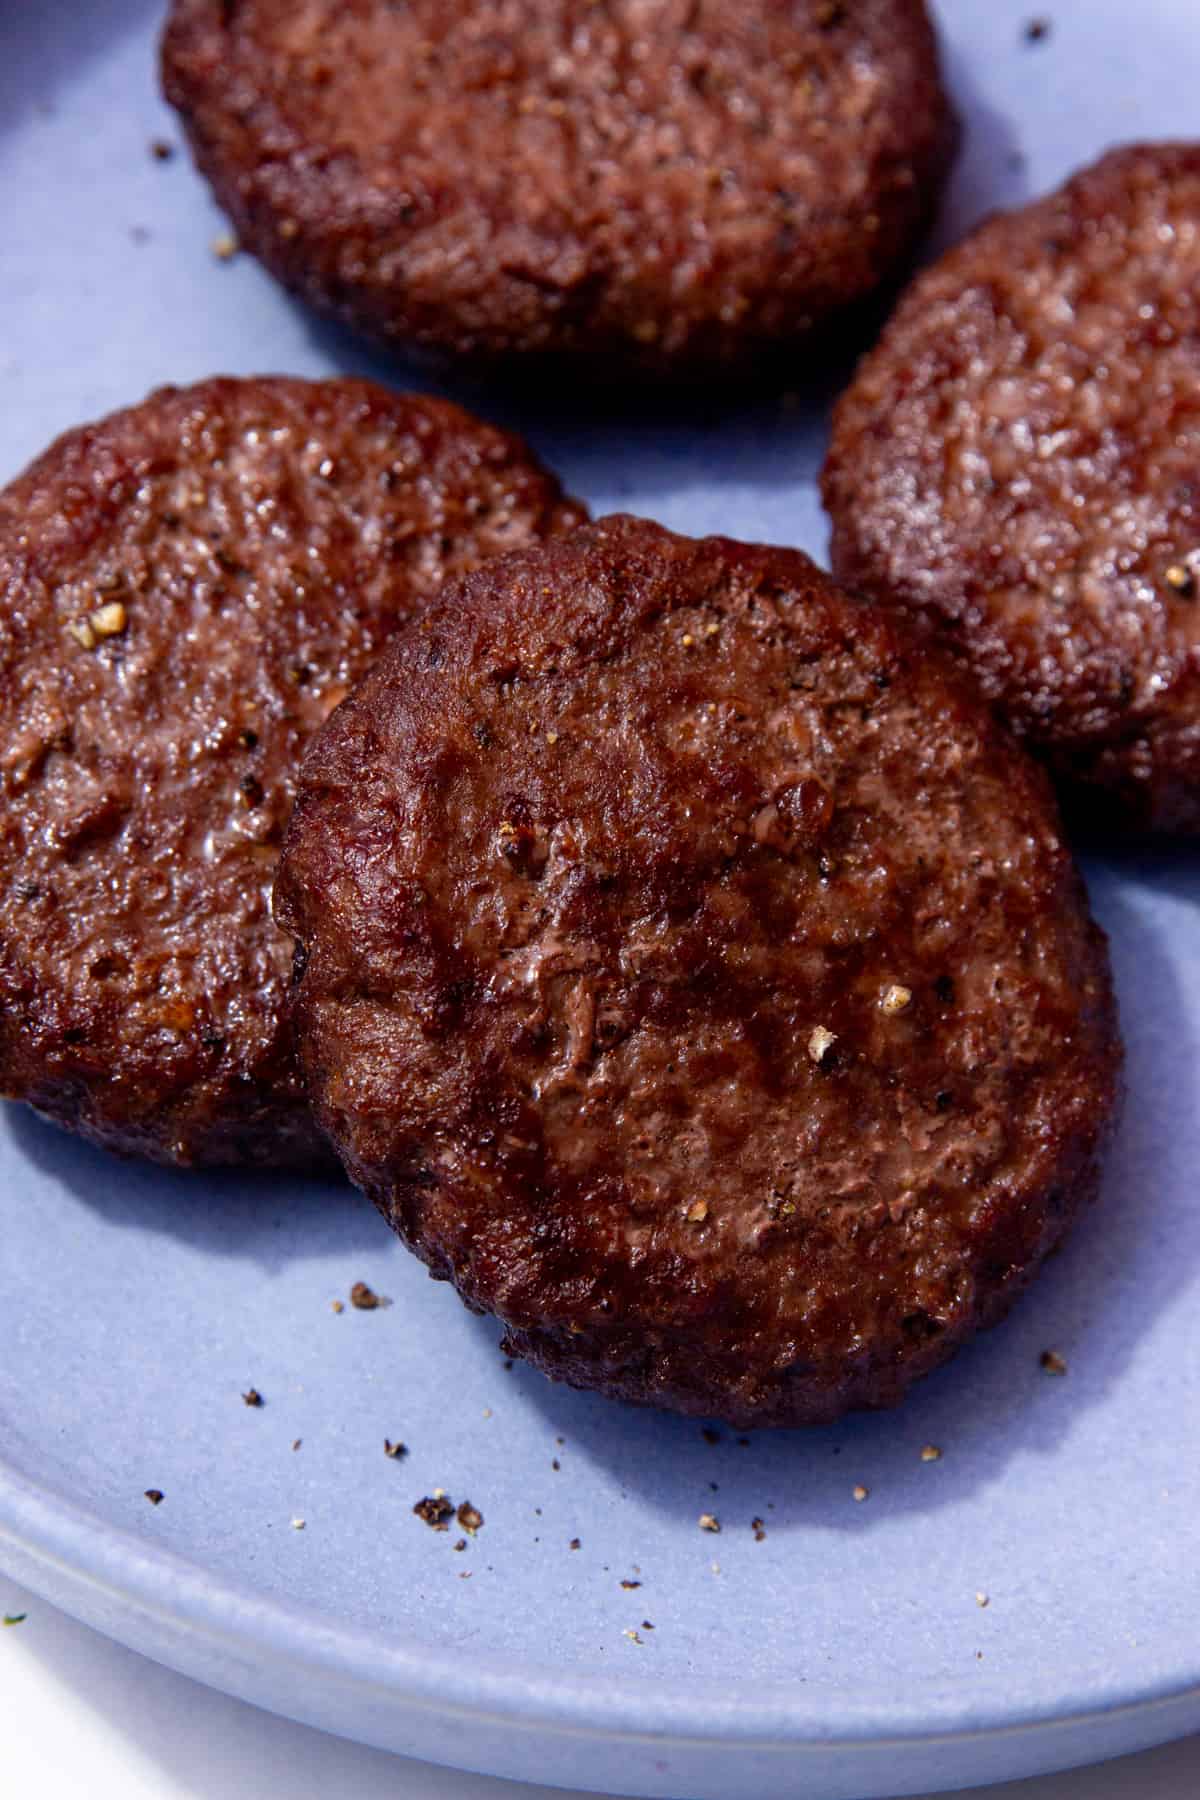 4 cooked, dark browned burgers on a blue plate.